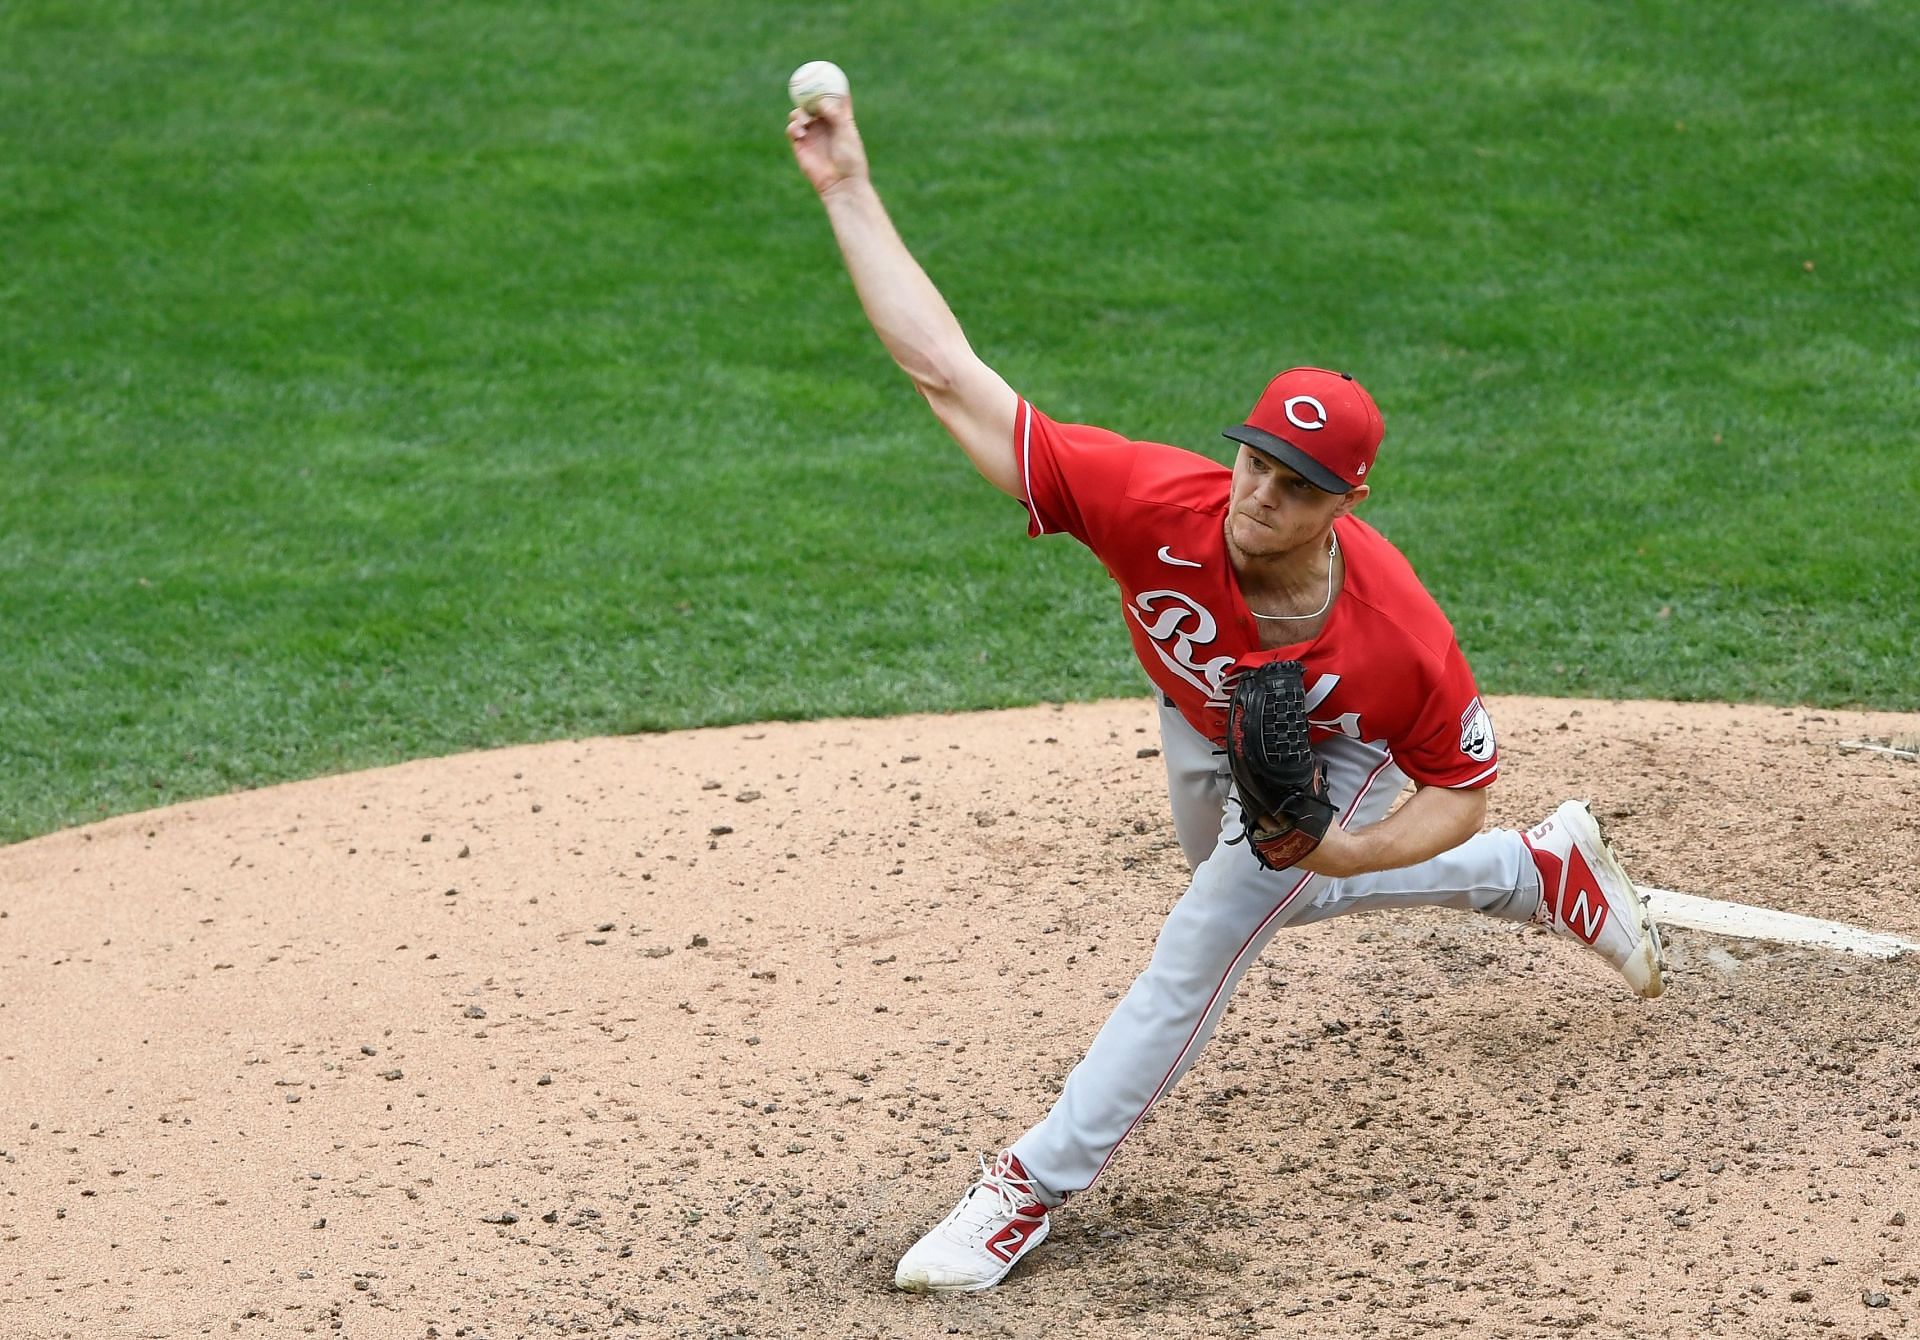 Cincinnati Reds trade pitcher Sonny Gray for Minnesota Twins Chase Petty